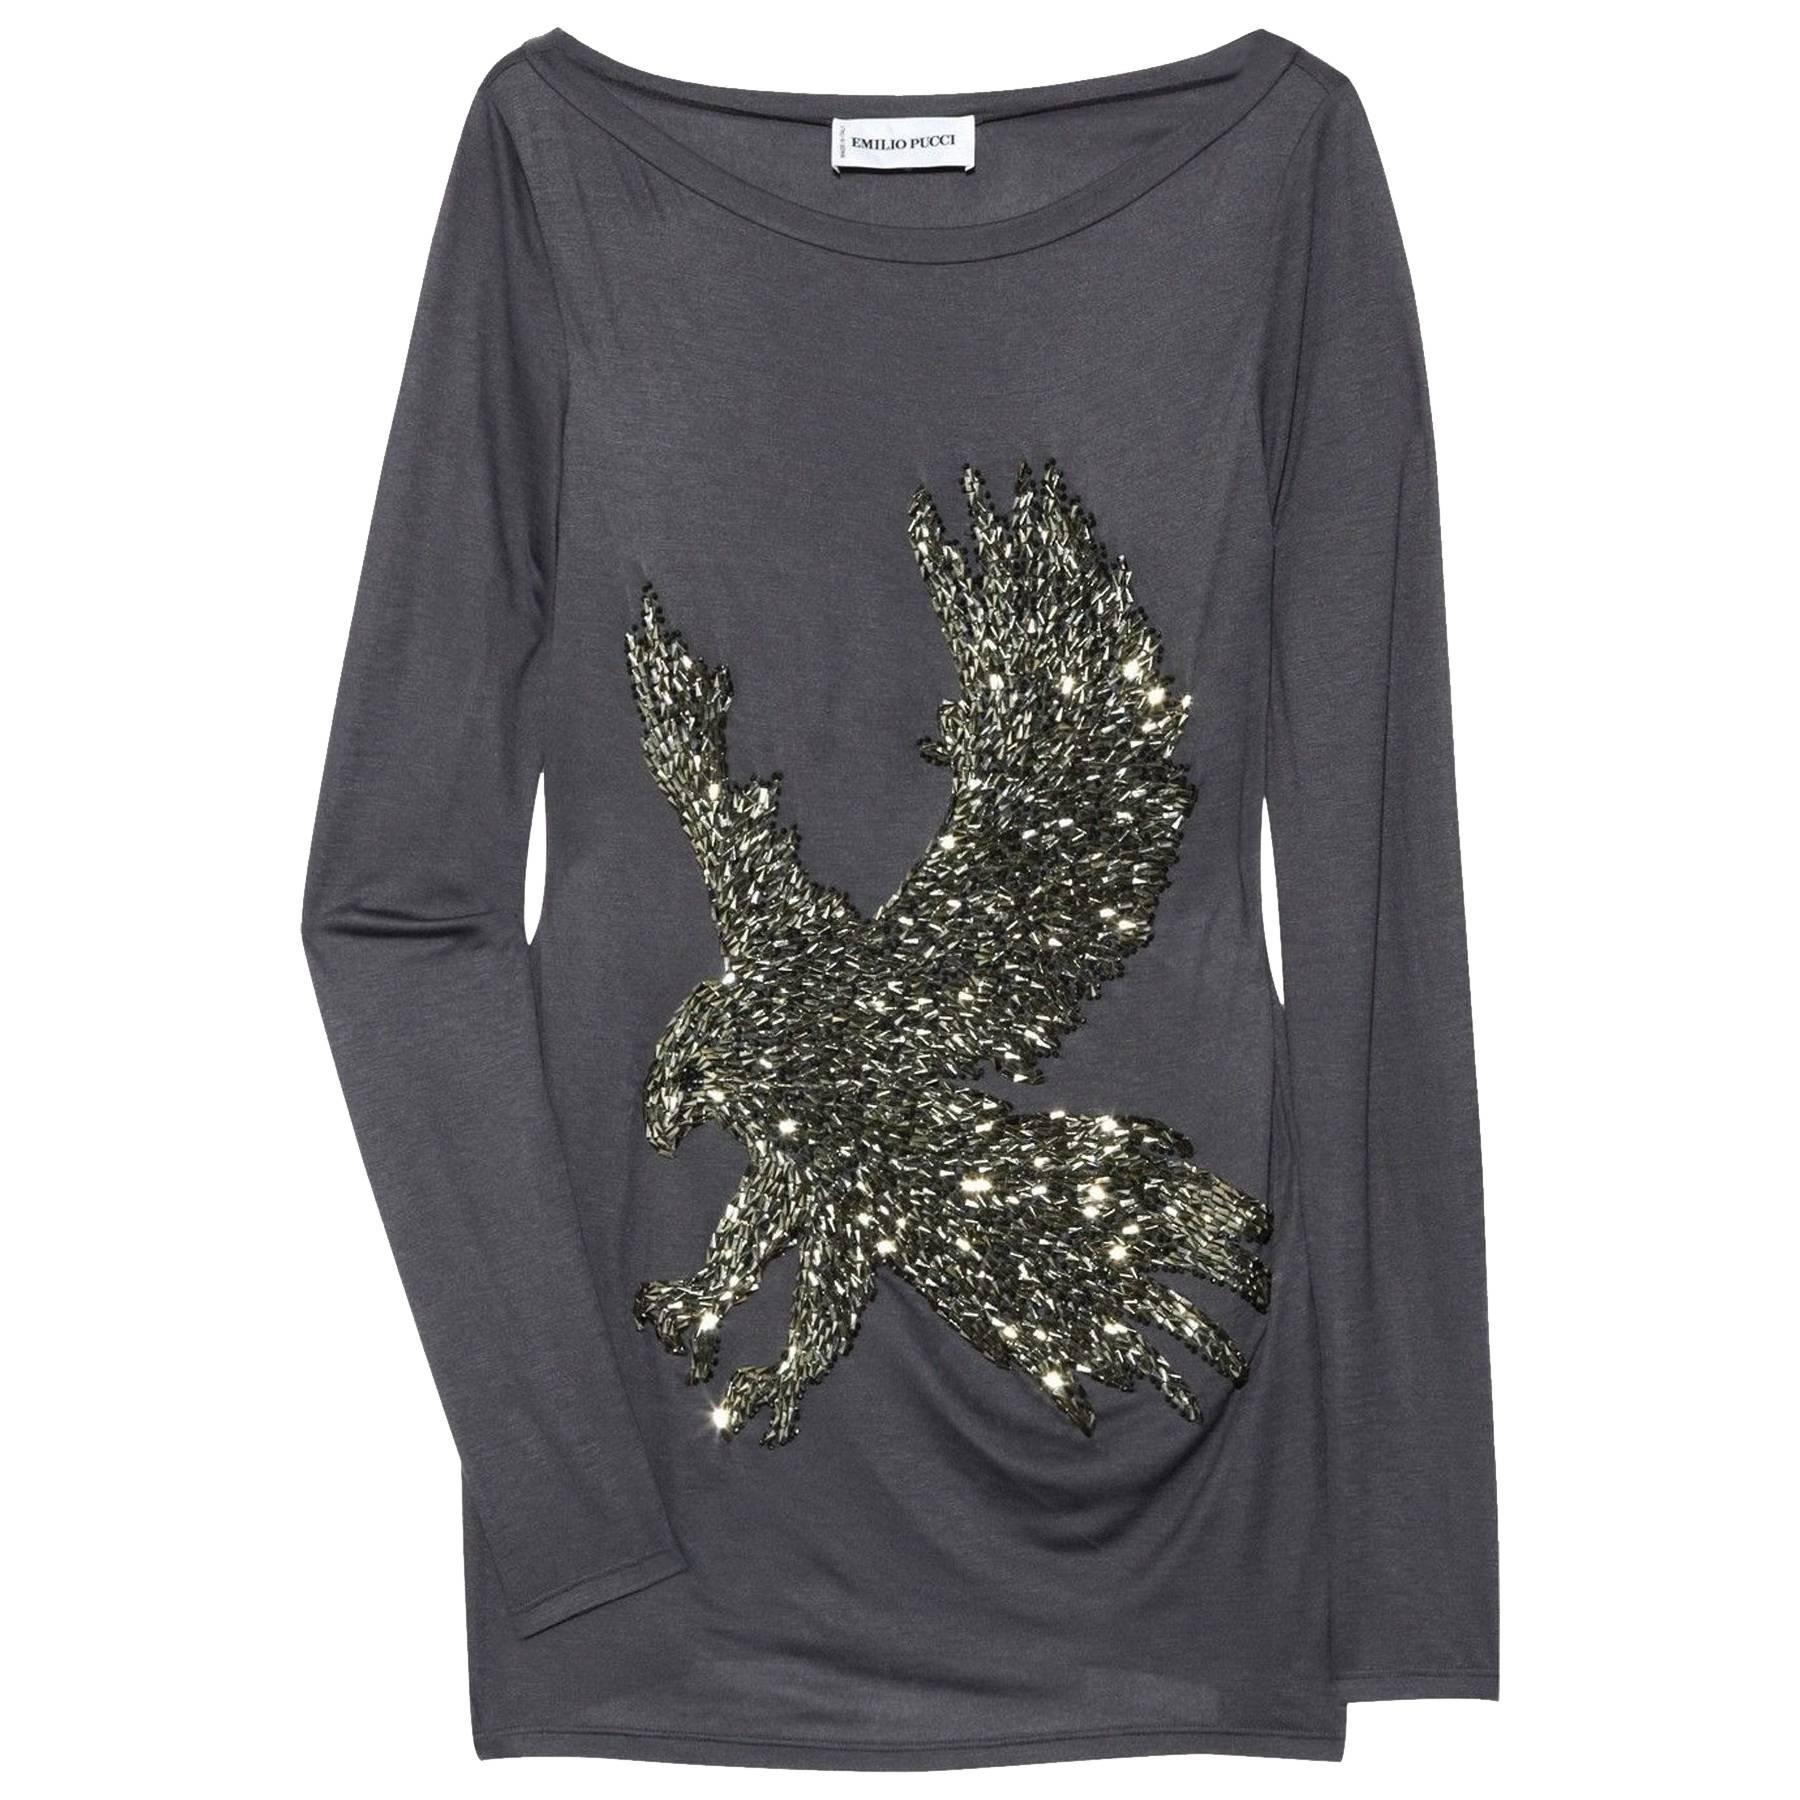 New EMILIO PUCCI Eagle Hand Embellished Beaded Gray Jersey Long Sleeve Top 38  4